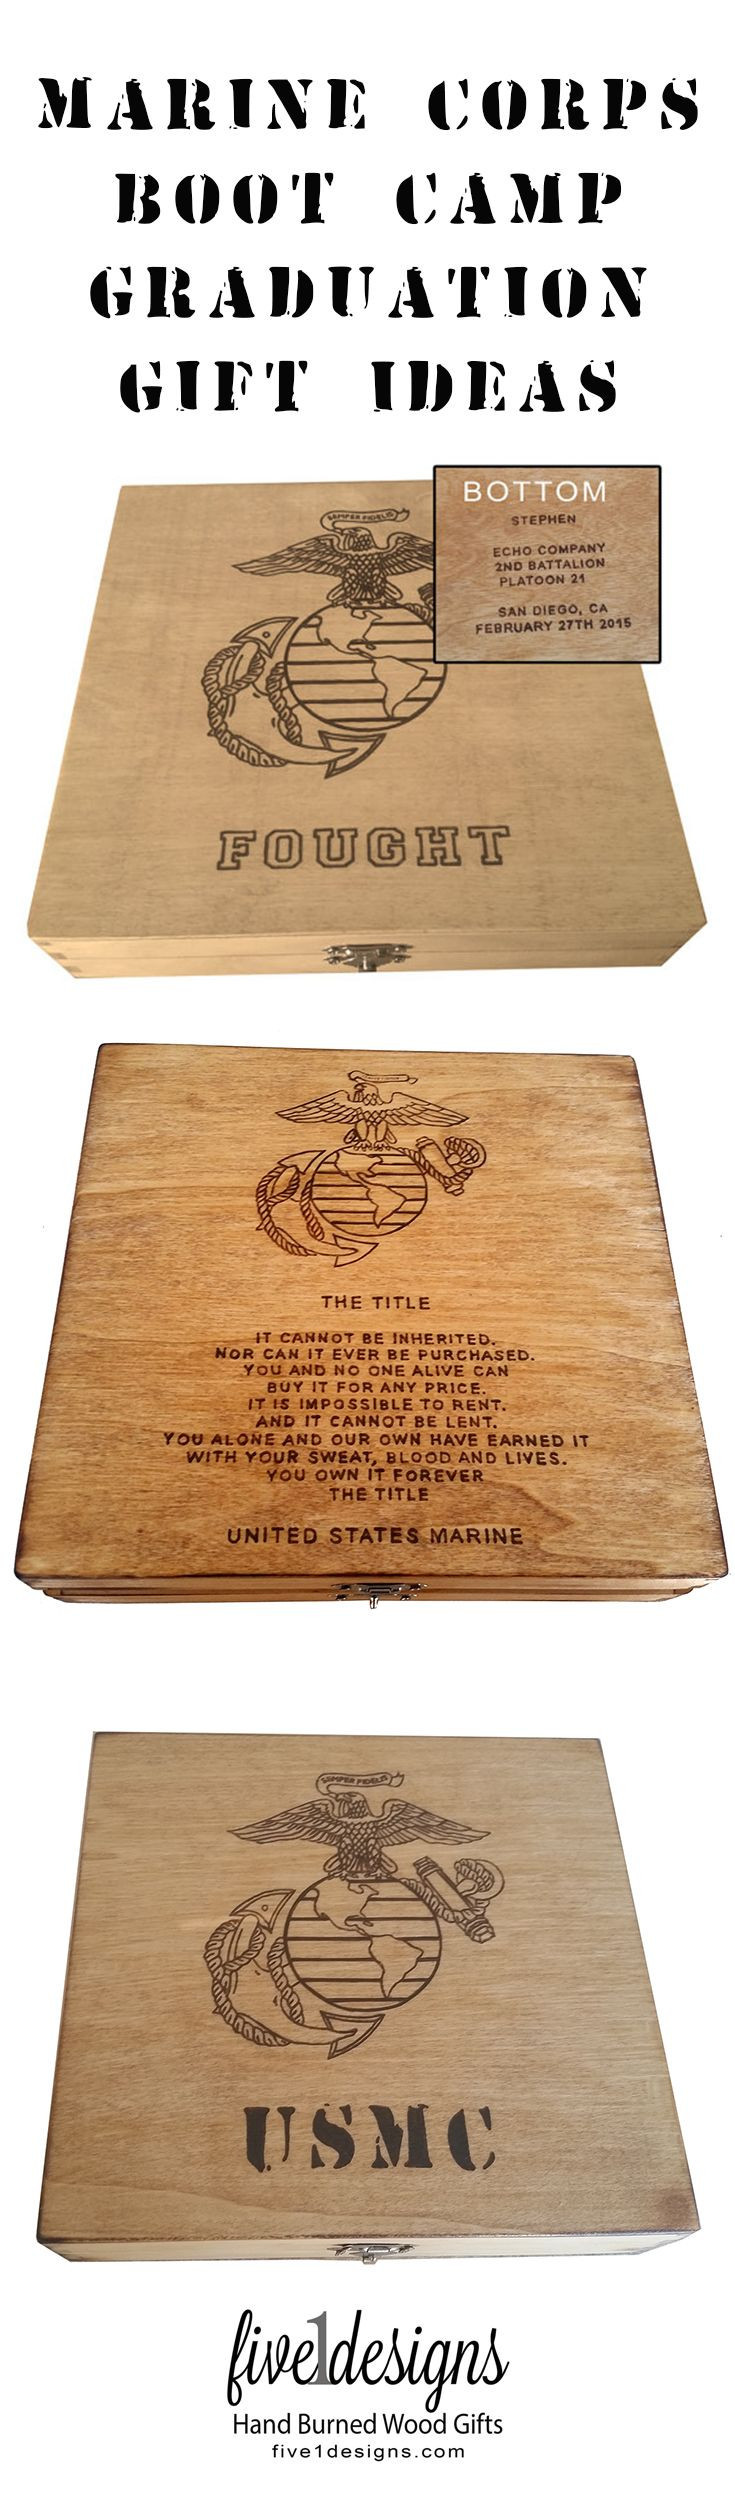 Gift Ideas For Marine Boot Camp Graduation
 Best 25 Gift Ideas for Marine Boot Camp Graduation Home